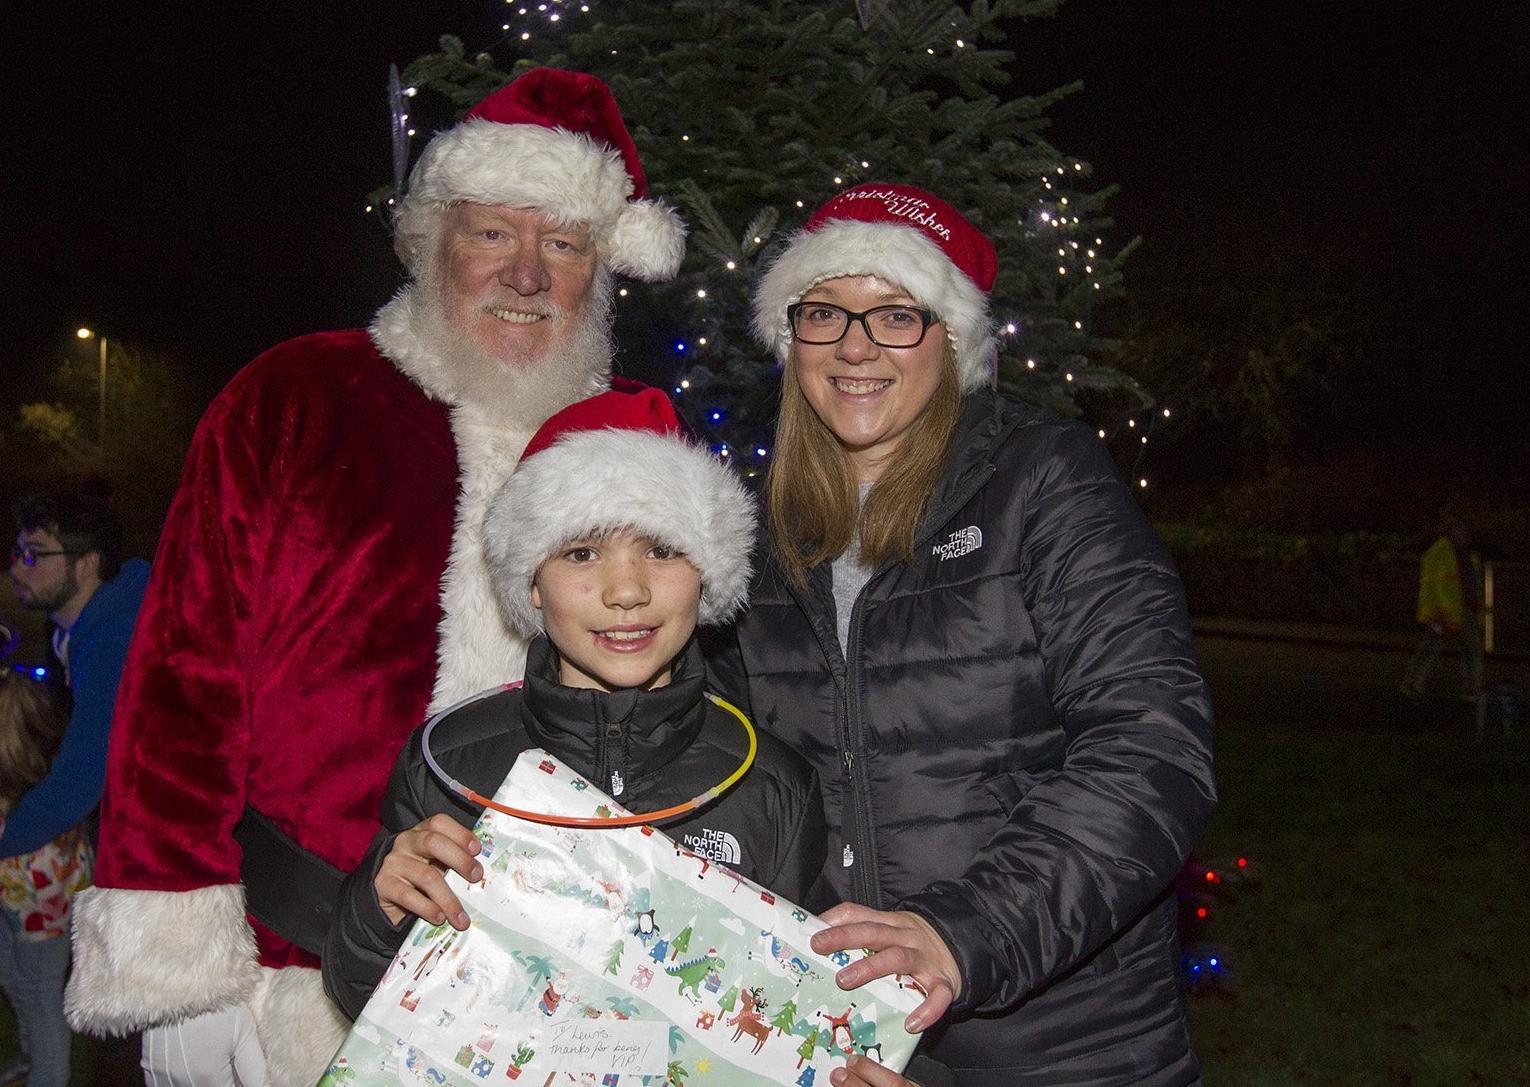 Lewis Turnbull Moffat turned on the lights at Newtown with Santa and his mum Gabrielle